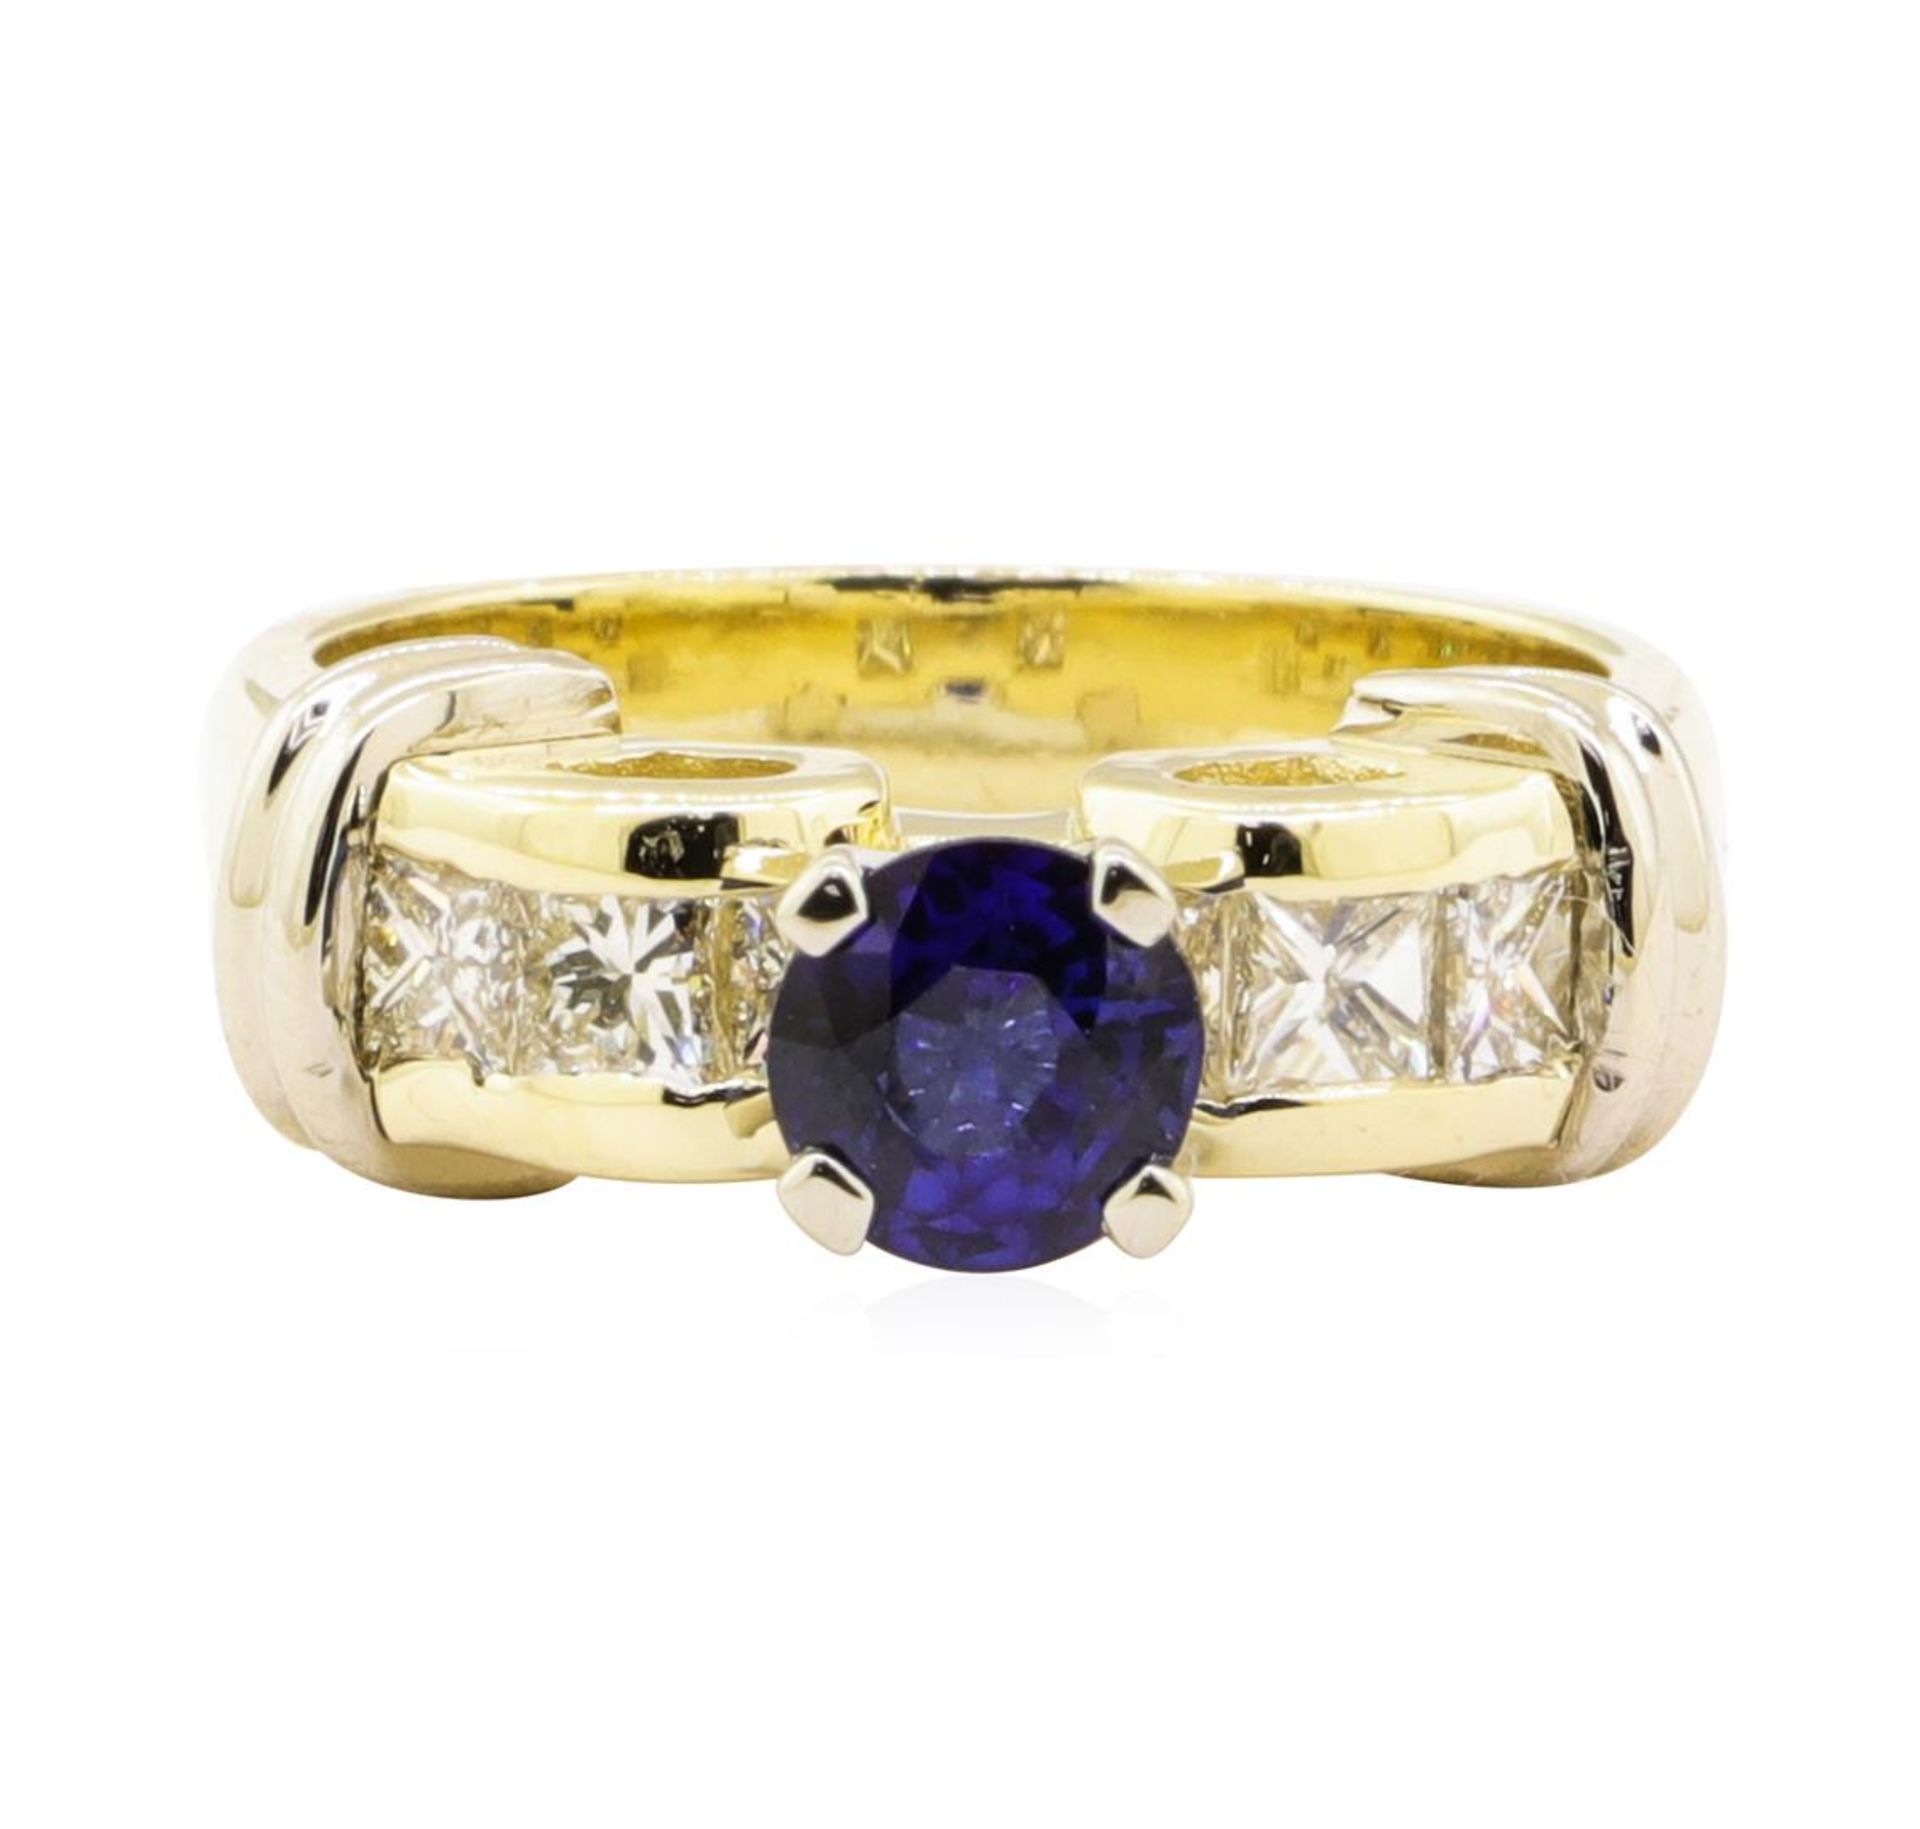 1.67 ctw Blue Sapphire And Diamond Ring - 14KT Yellow And White Gold - Image 2 of 5